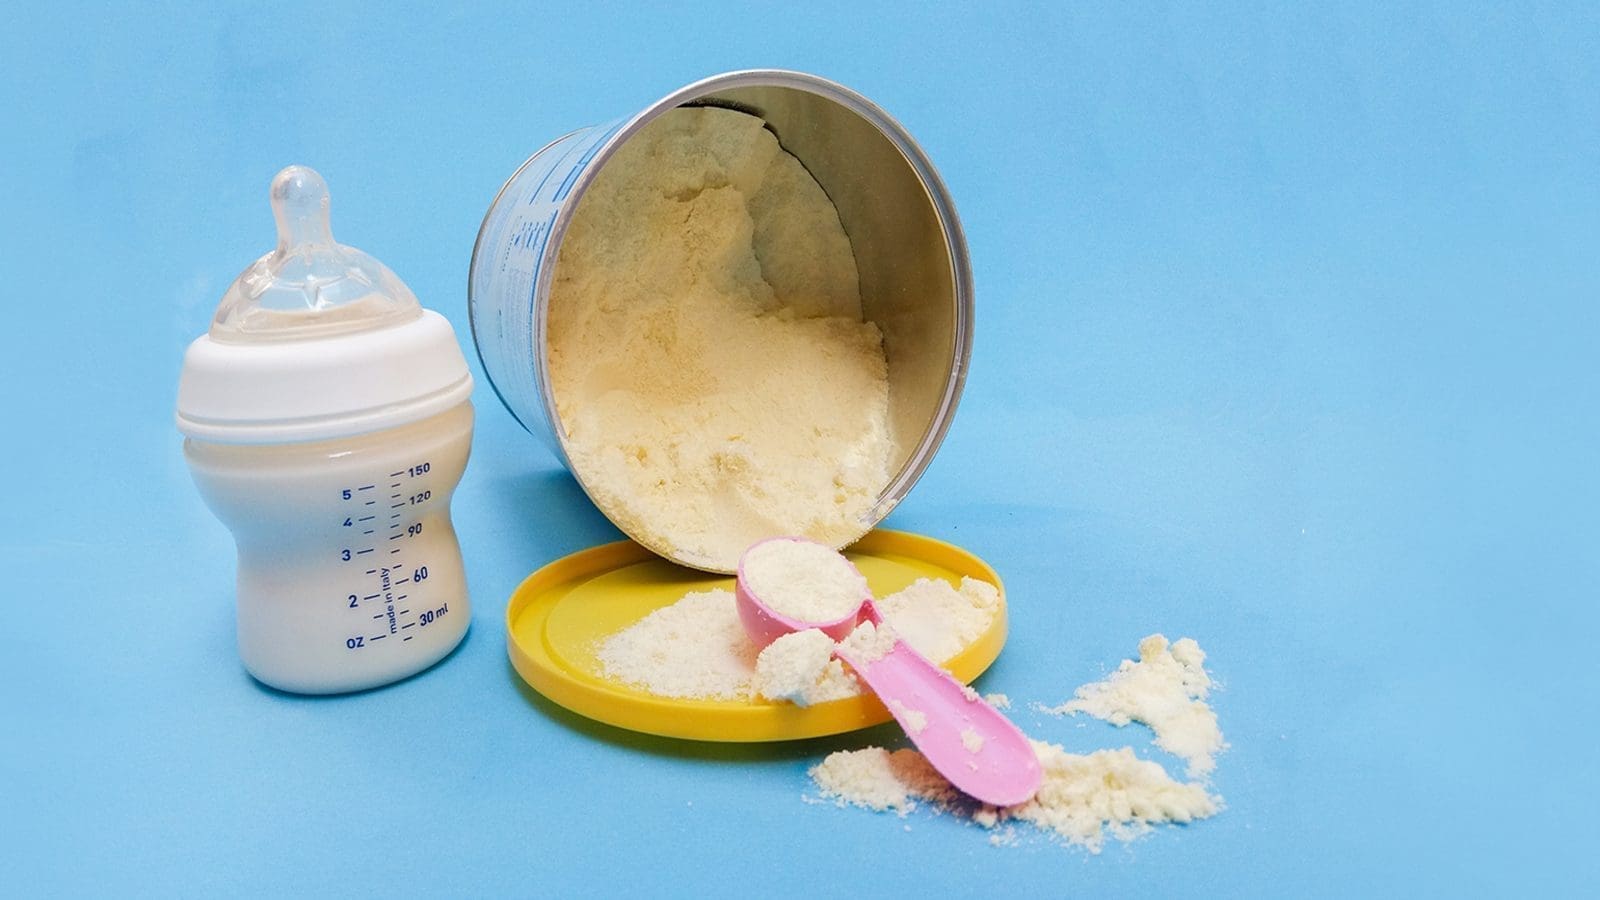 China extends approval of HMOs for use in infant formula